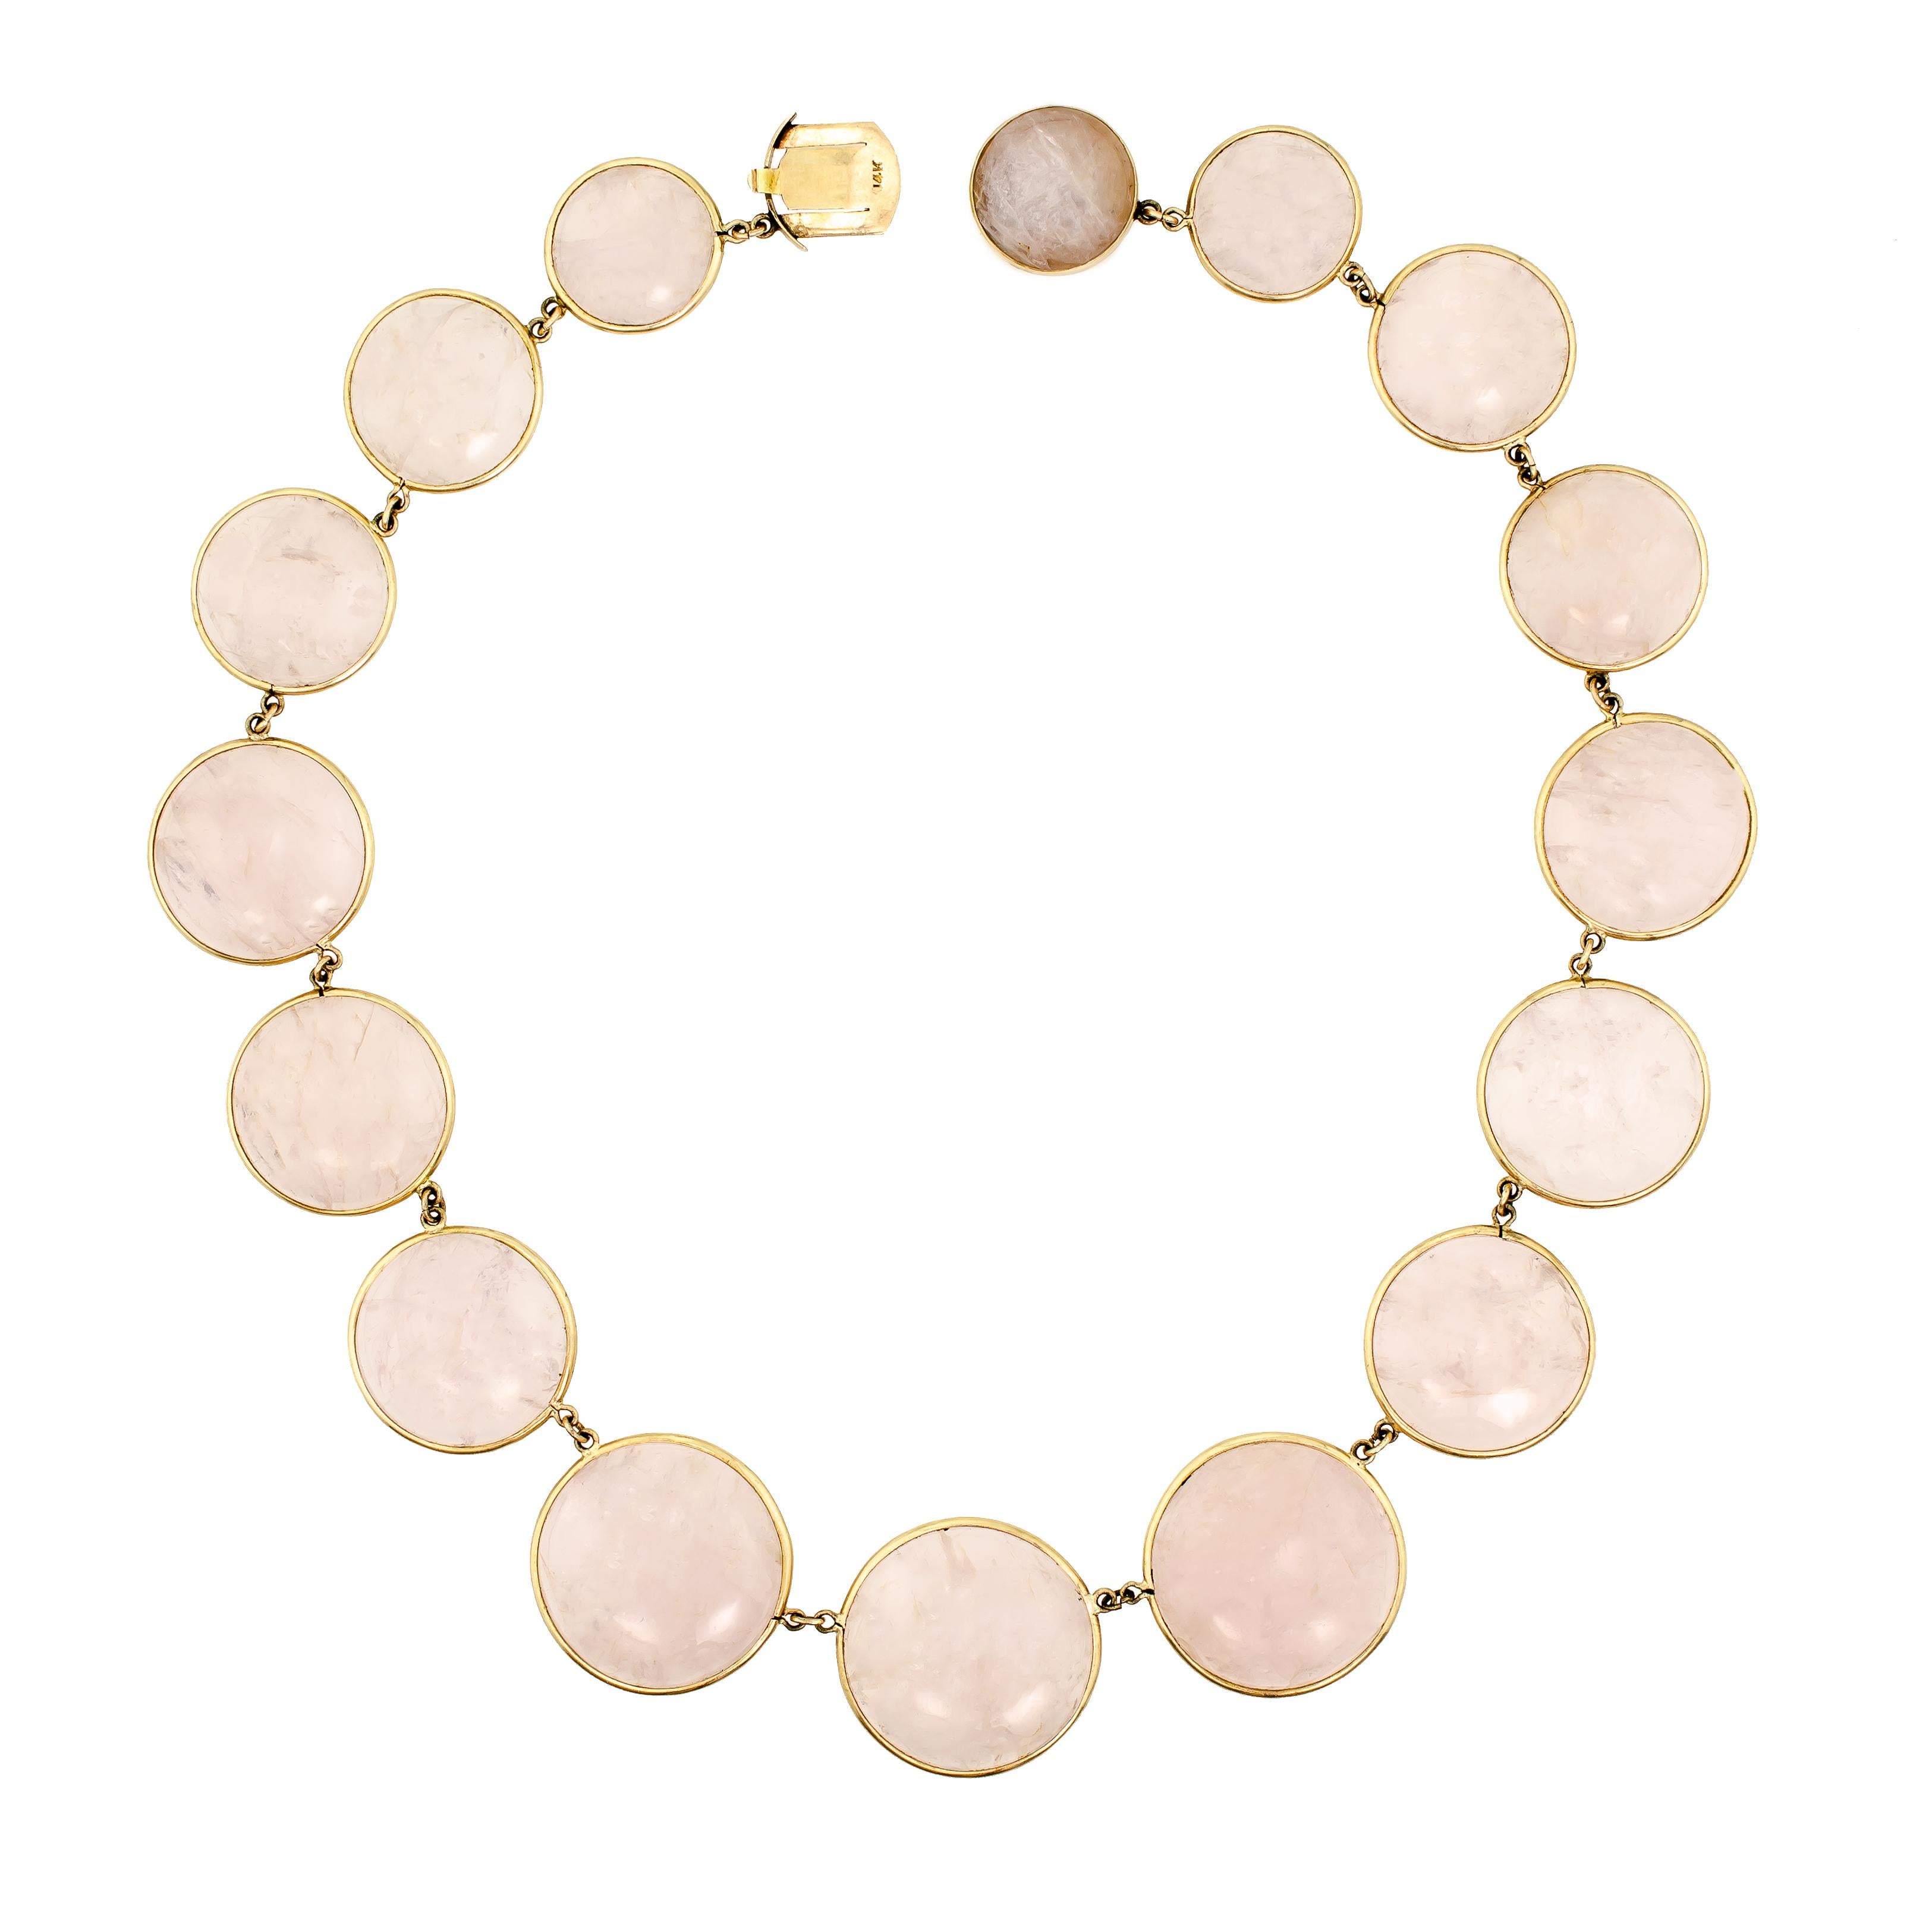 Attractive circa 1970 rose quartz and yellow gold circle necklace - set with 16 round graduated rose quartz cabochons (including one as a hidden clasp) yellow gold mount - 15 1/2